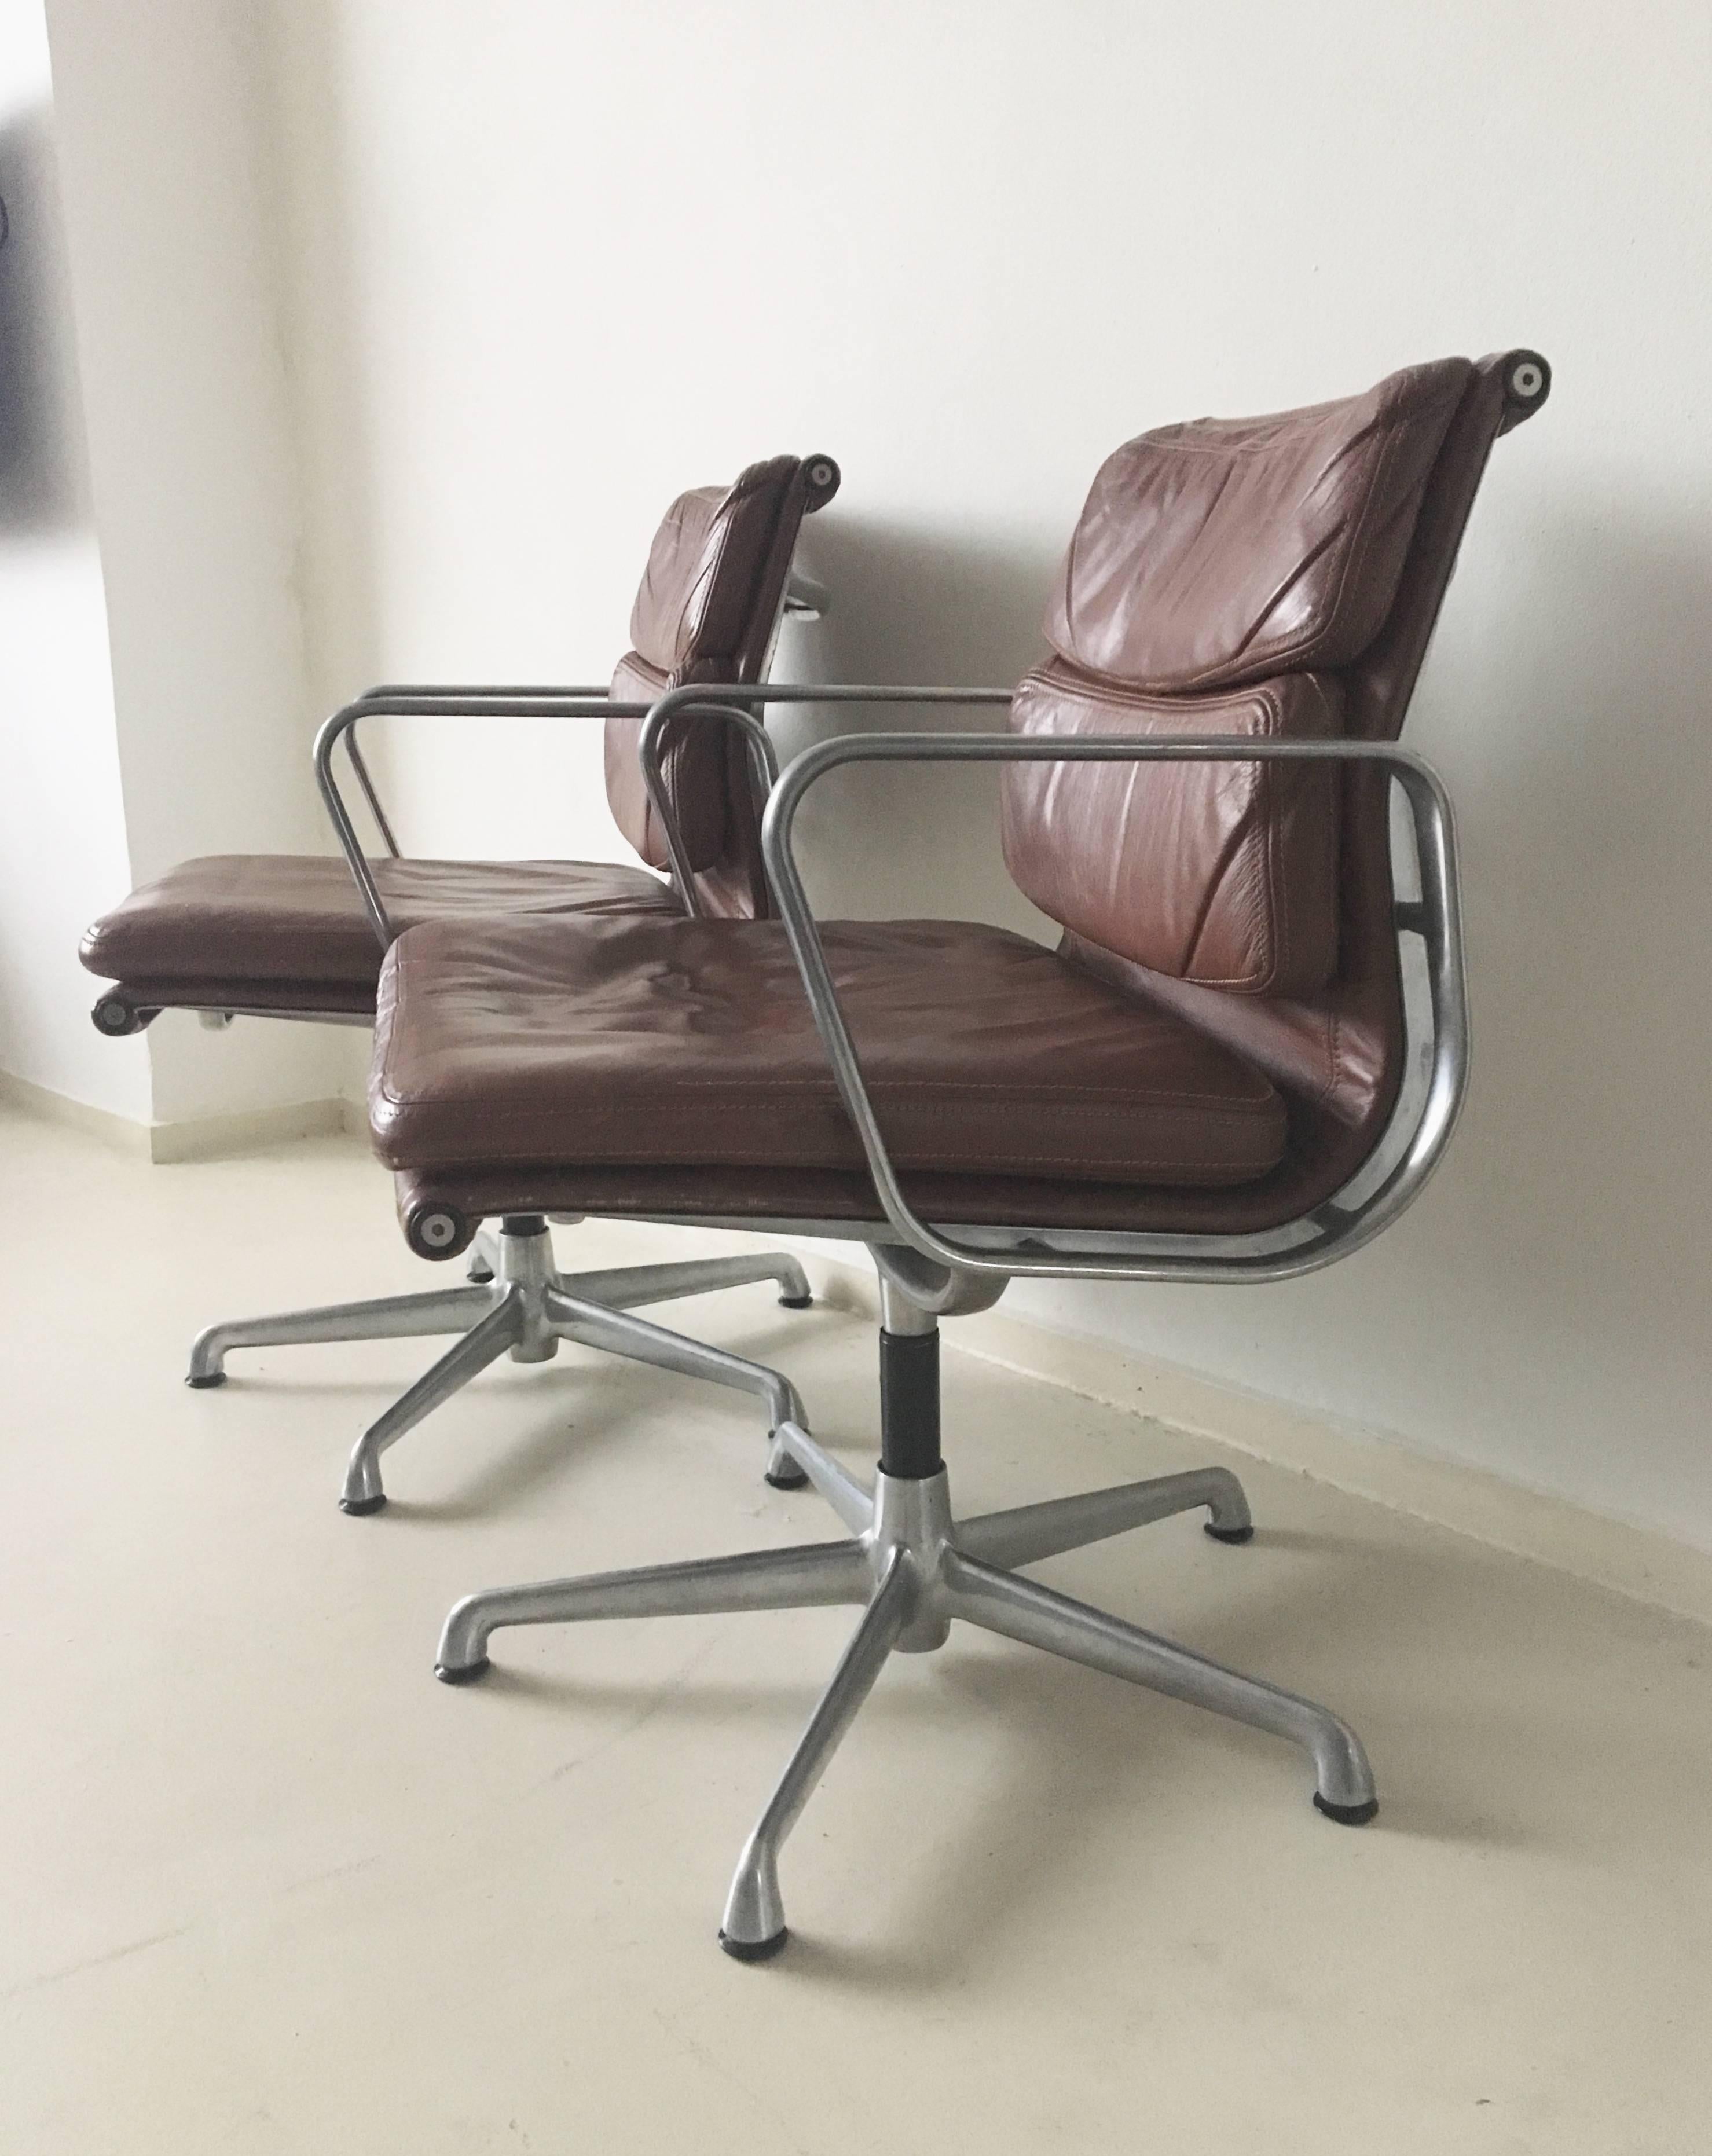 Mid-Century Modern Charles Eames Soft Pad Chairs EA208, for ICF Italy, 1960s (ONLY 1 LEFT)